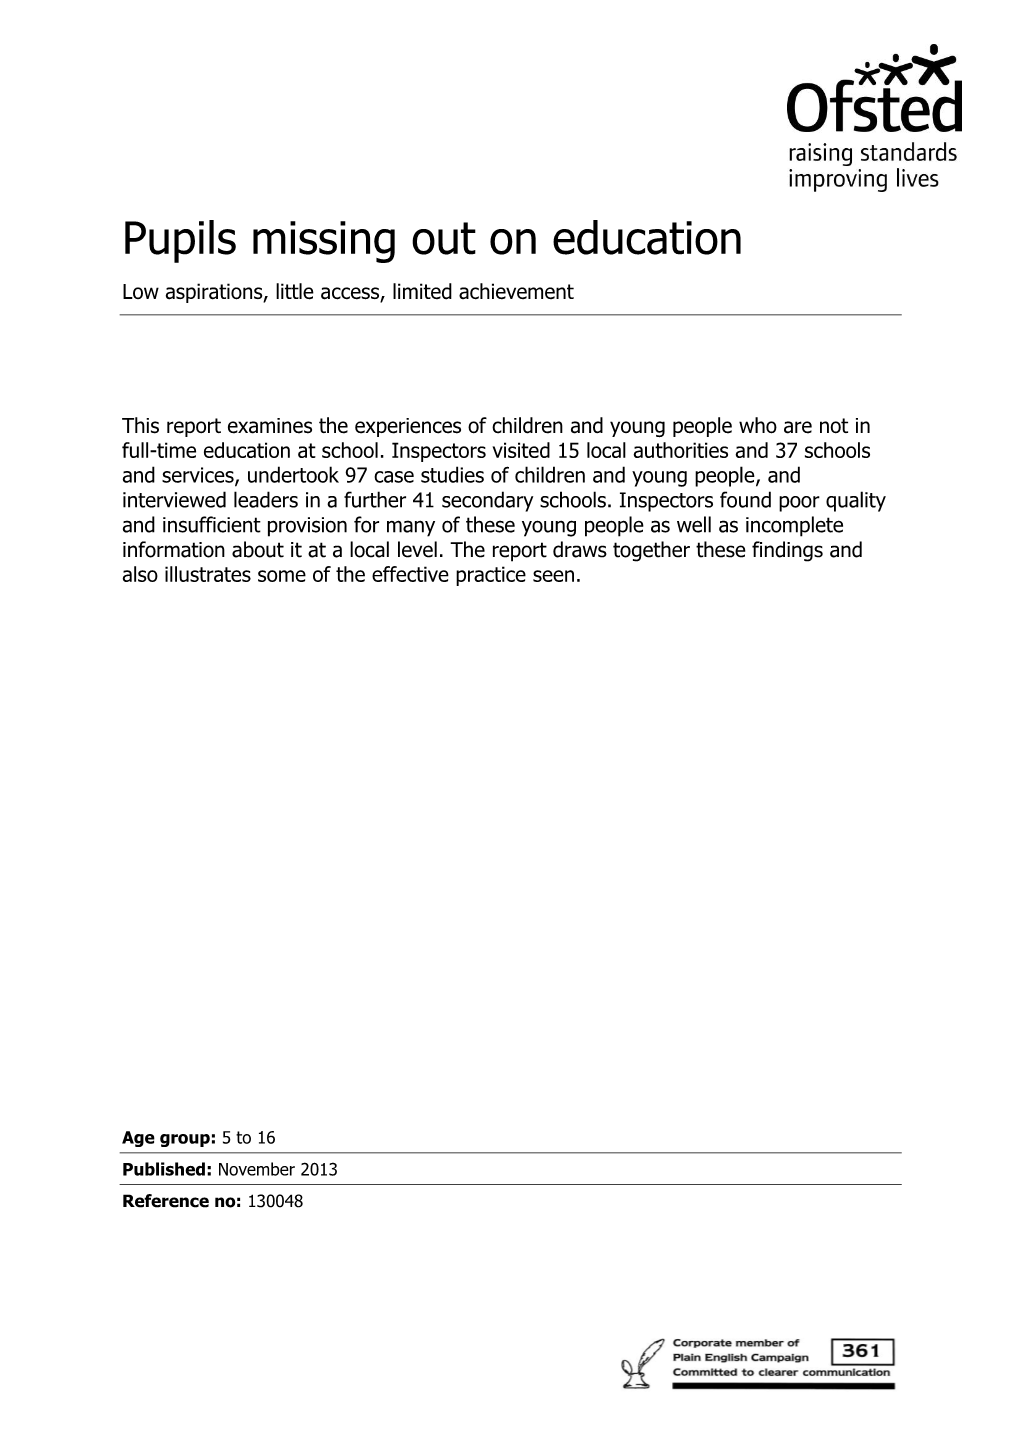 Pupils Missing out on Education Low Aspirations, Little Access, Limited Achievement